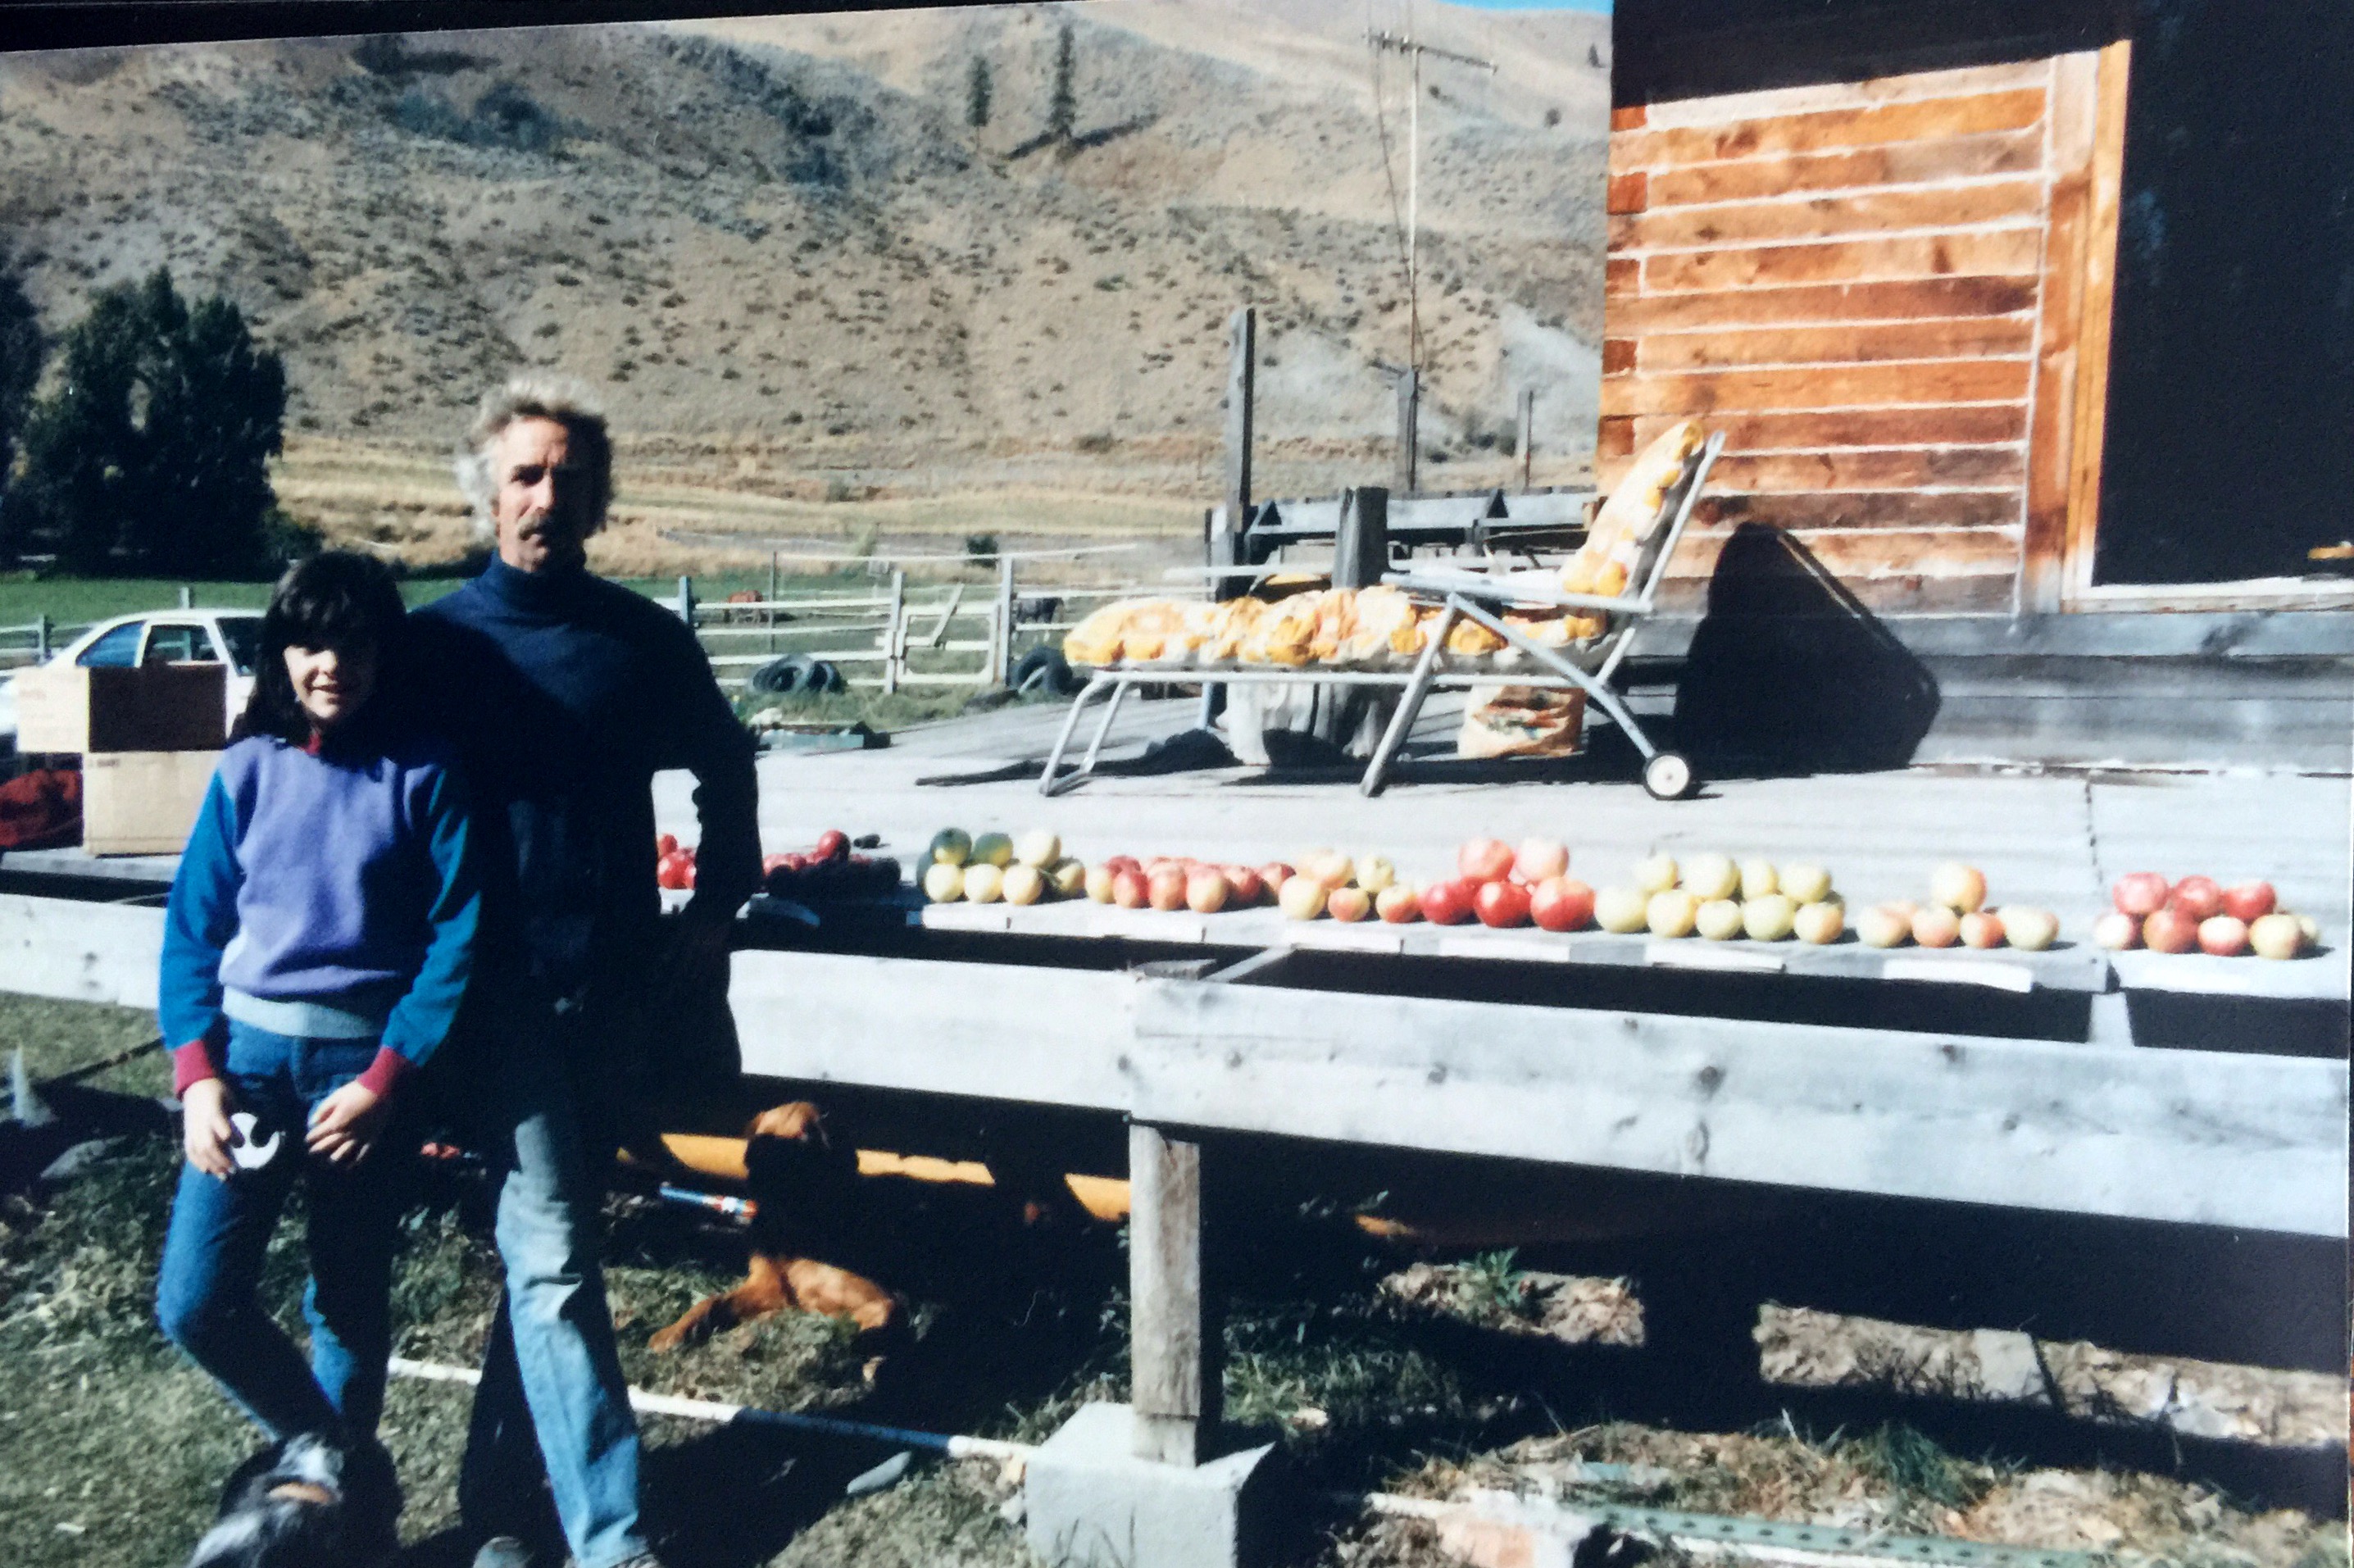 Bernie and Jaws Methow Valley 1984?... for a taste comparison we got 12 varieties of apples from Vern and Buellas orchard (there were 18, some weren't ready) ... 